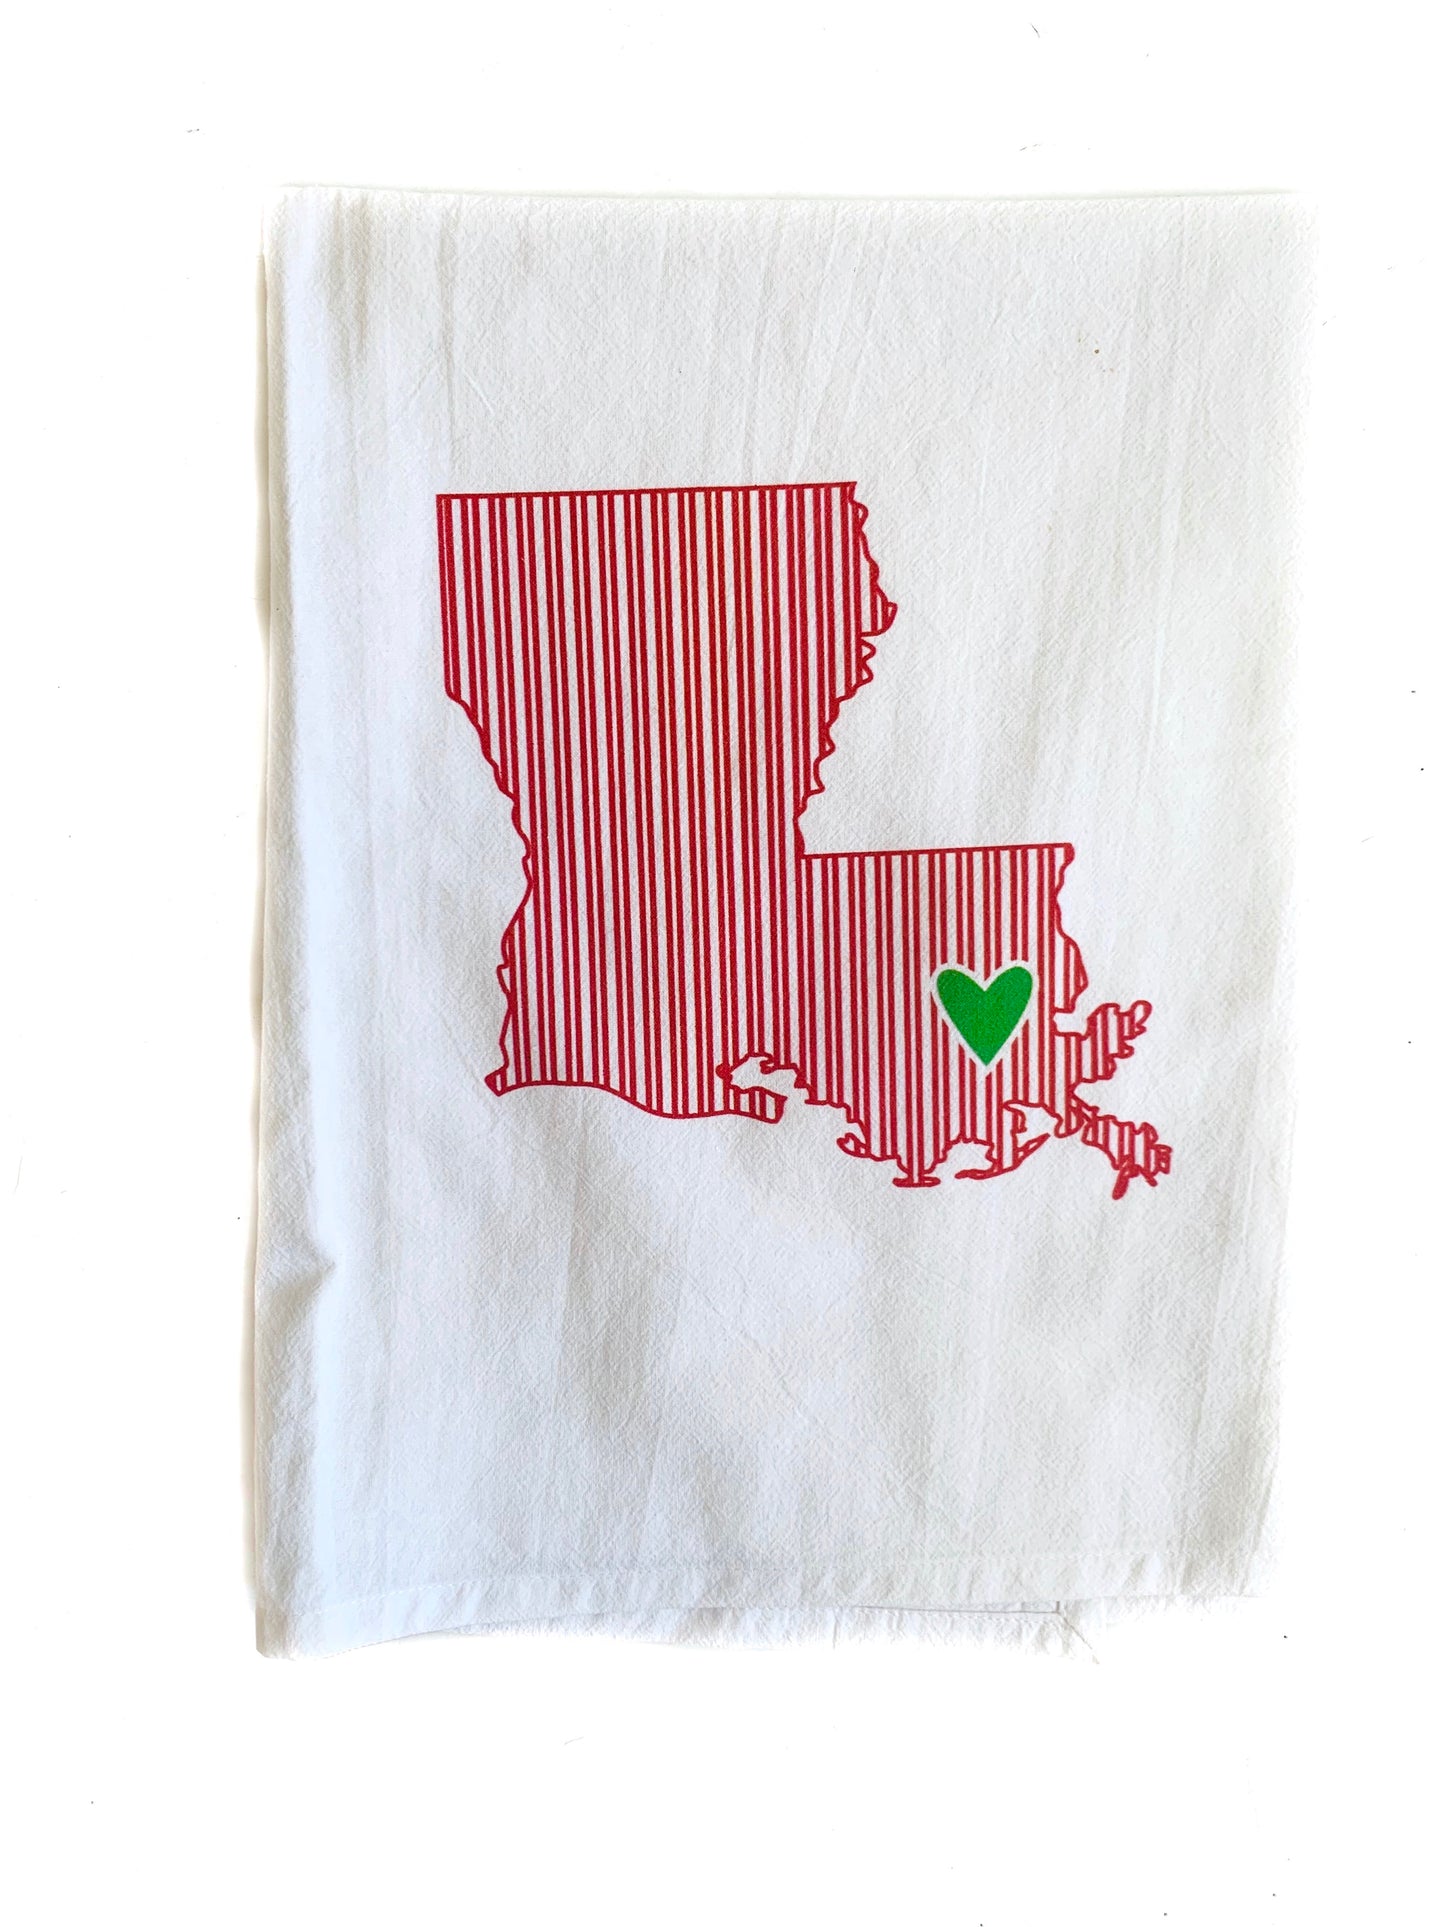 LA State Red Ticking w/ Green Heart